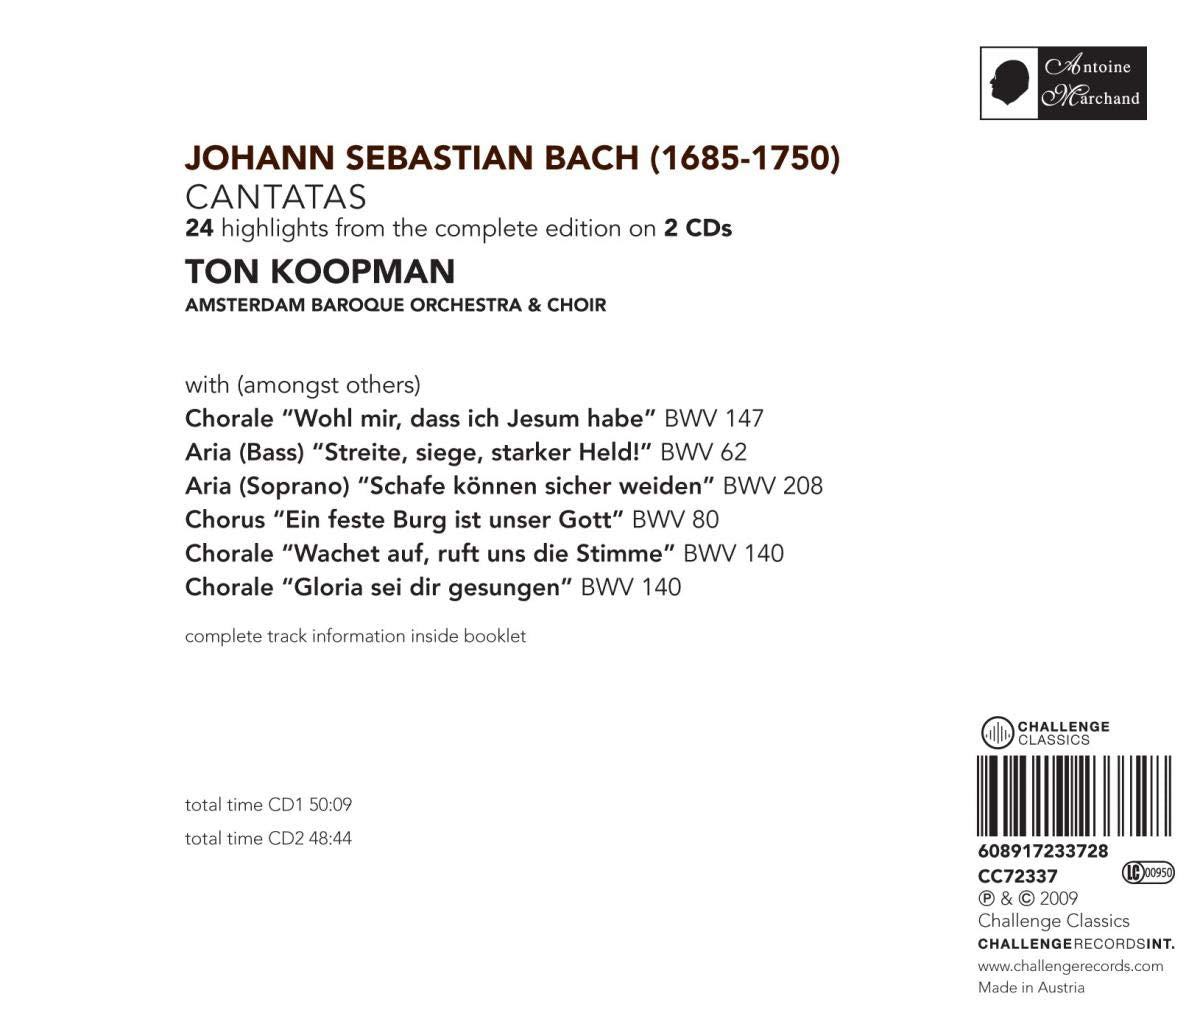 BACH: CANTATAS (24 HIGHLIGHTS from the COMPLETE EDITION) - TON KOOPMAN & AMSTERDAM BAROQUE ORCHESTRA & CHOIR (2 CDS)-